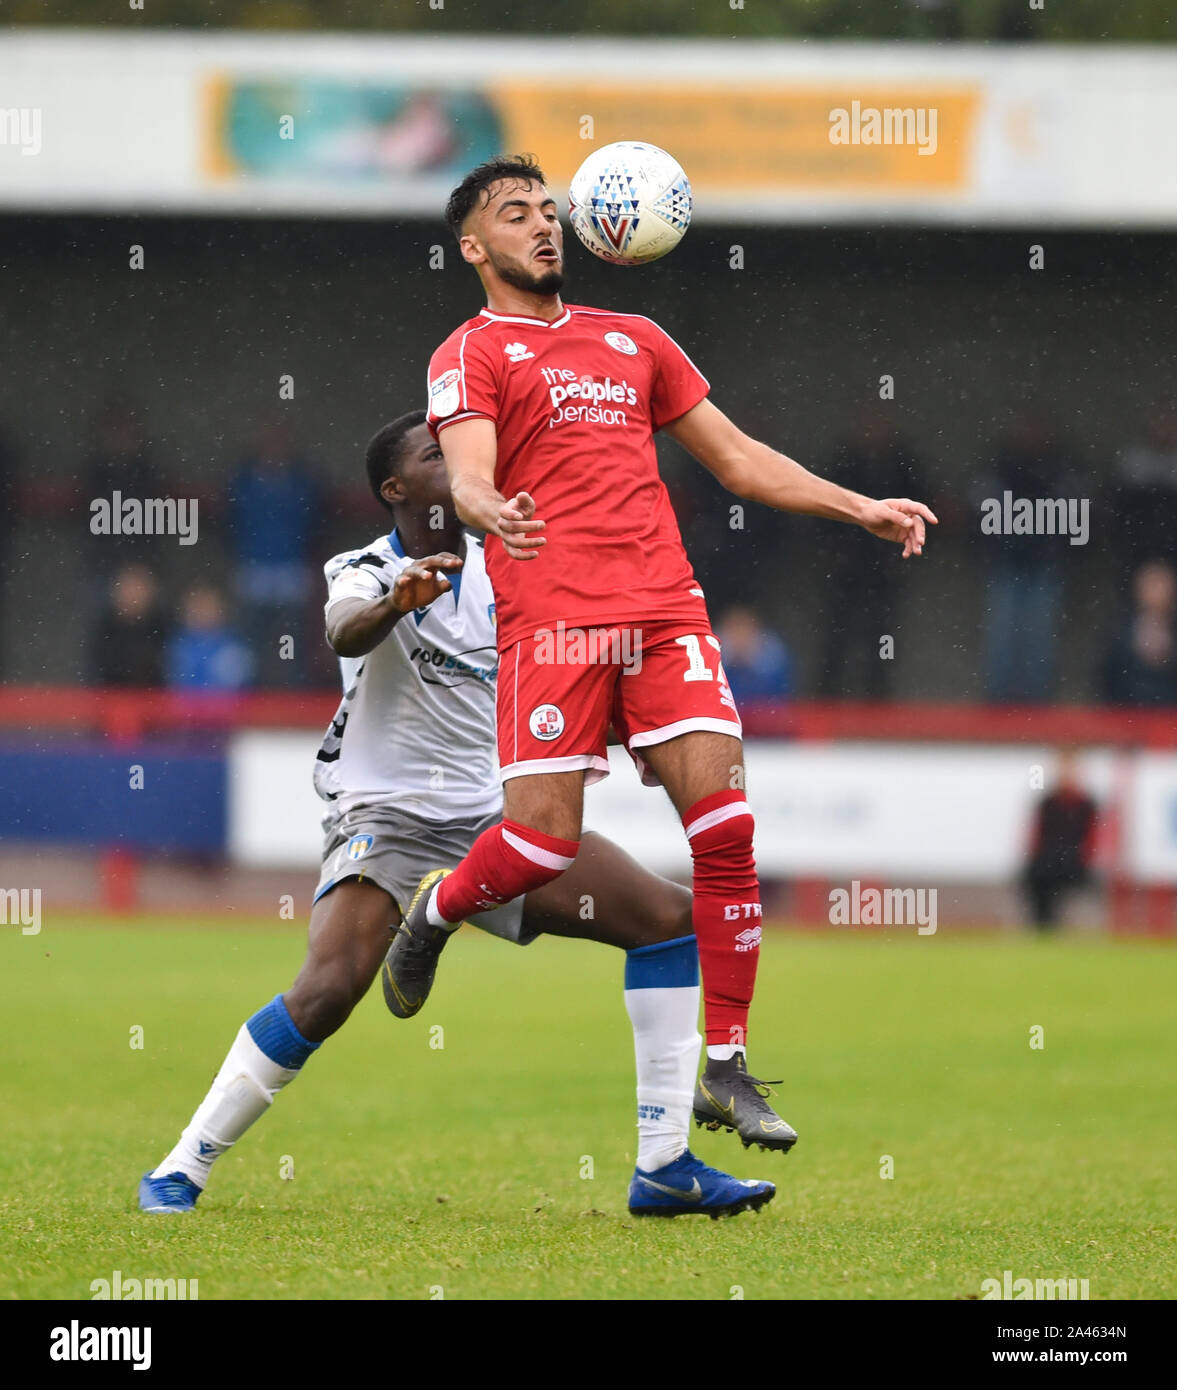 Crawley UK 12 October 2019 - Tarryn Allarakhia of Crawley traps the ball on his chest during the Skybet League Two match between Crawley Town and Colchester United at the People's Pension Stadium . Credit : Simon Dack TPI / Alamy Live News Stock Photo